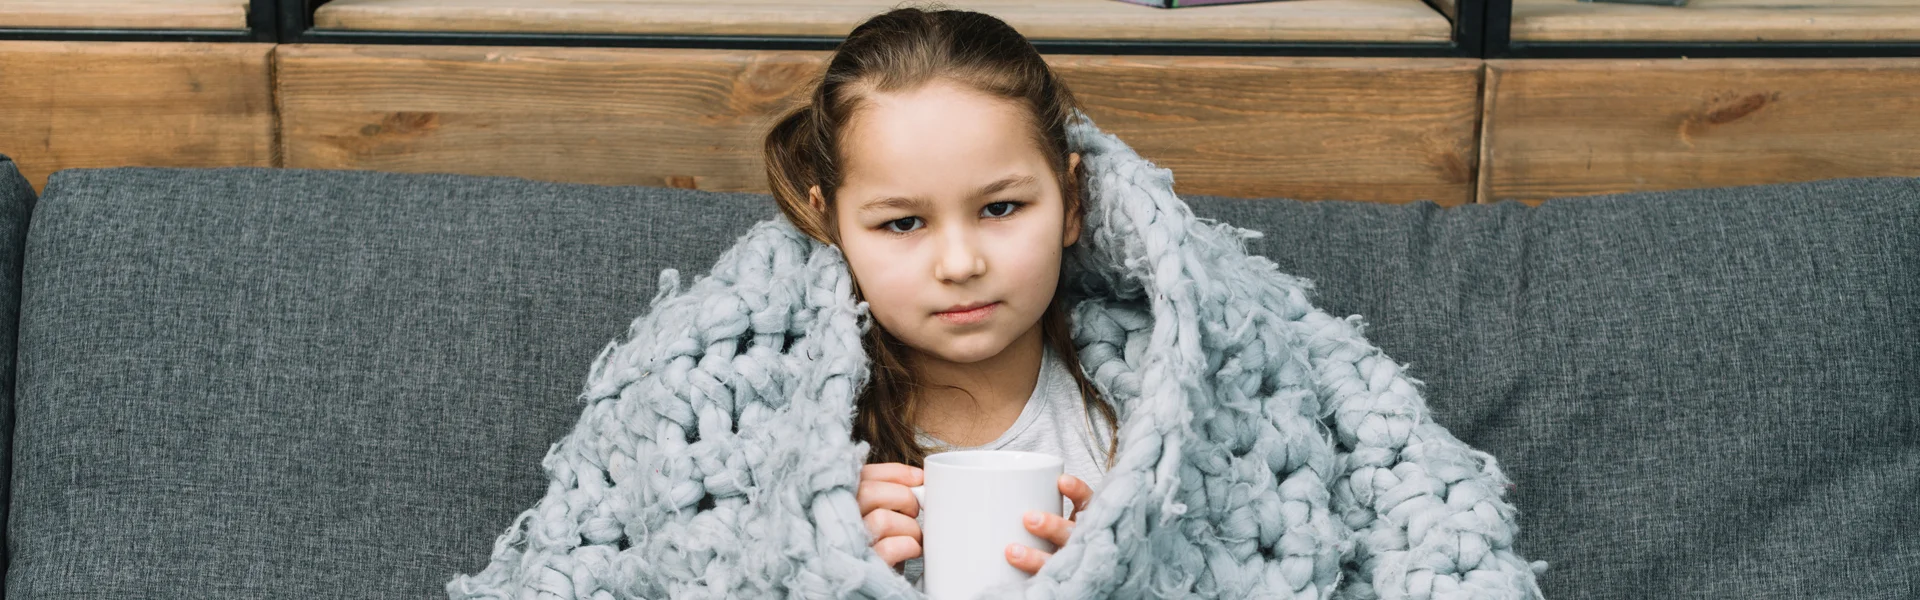 When Should I Take My Child to Urgent Care for A Fever? 